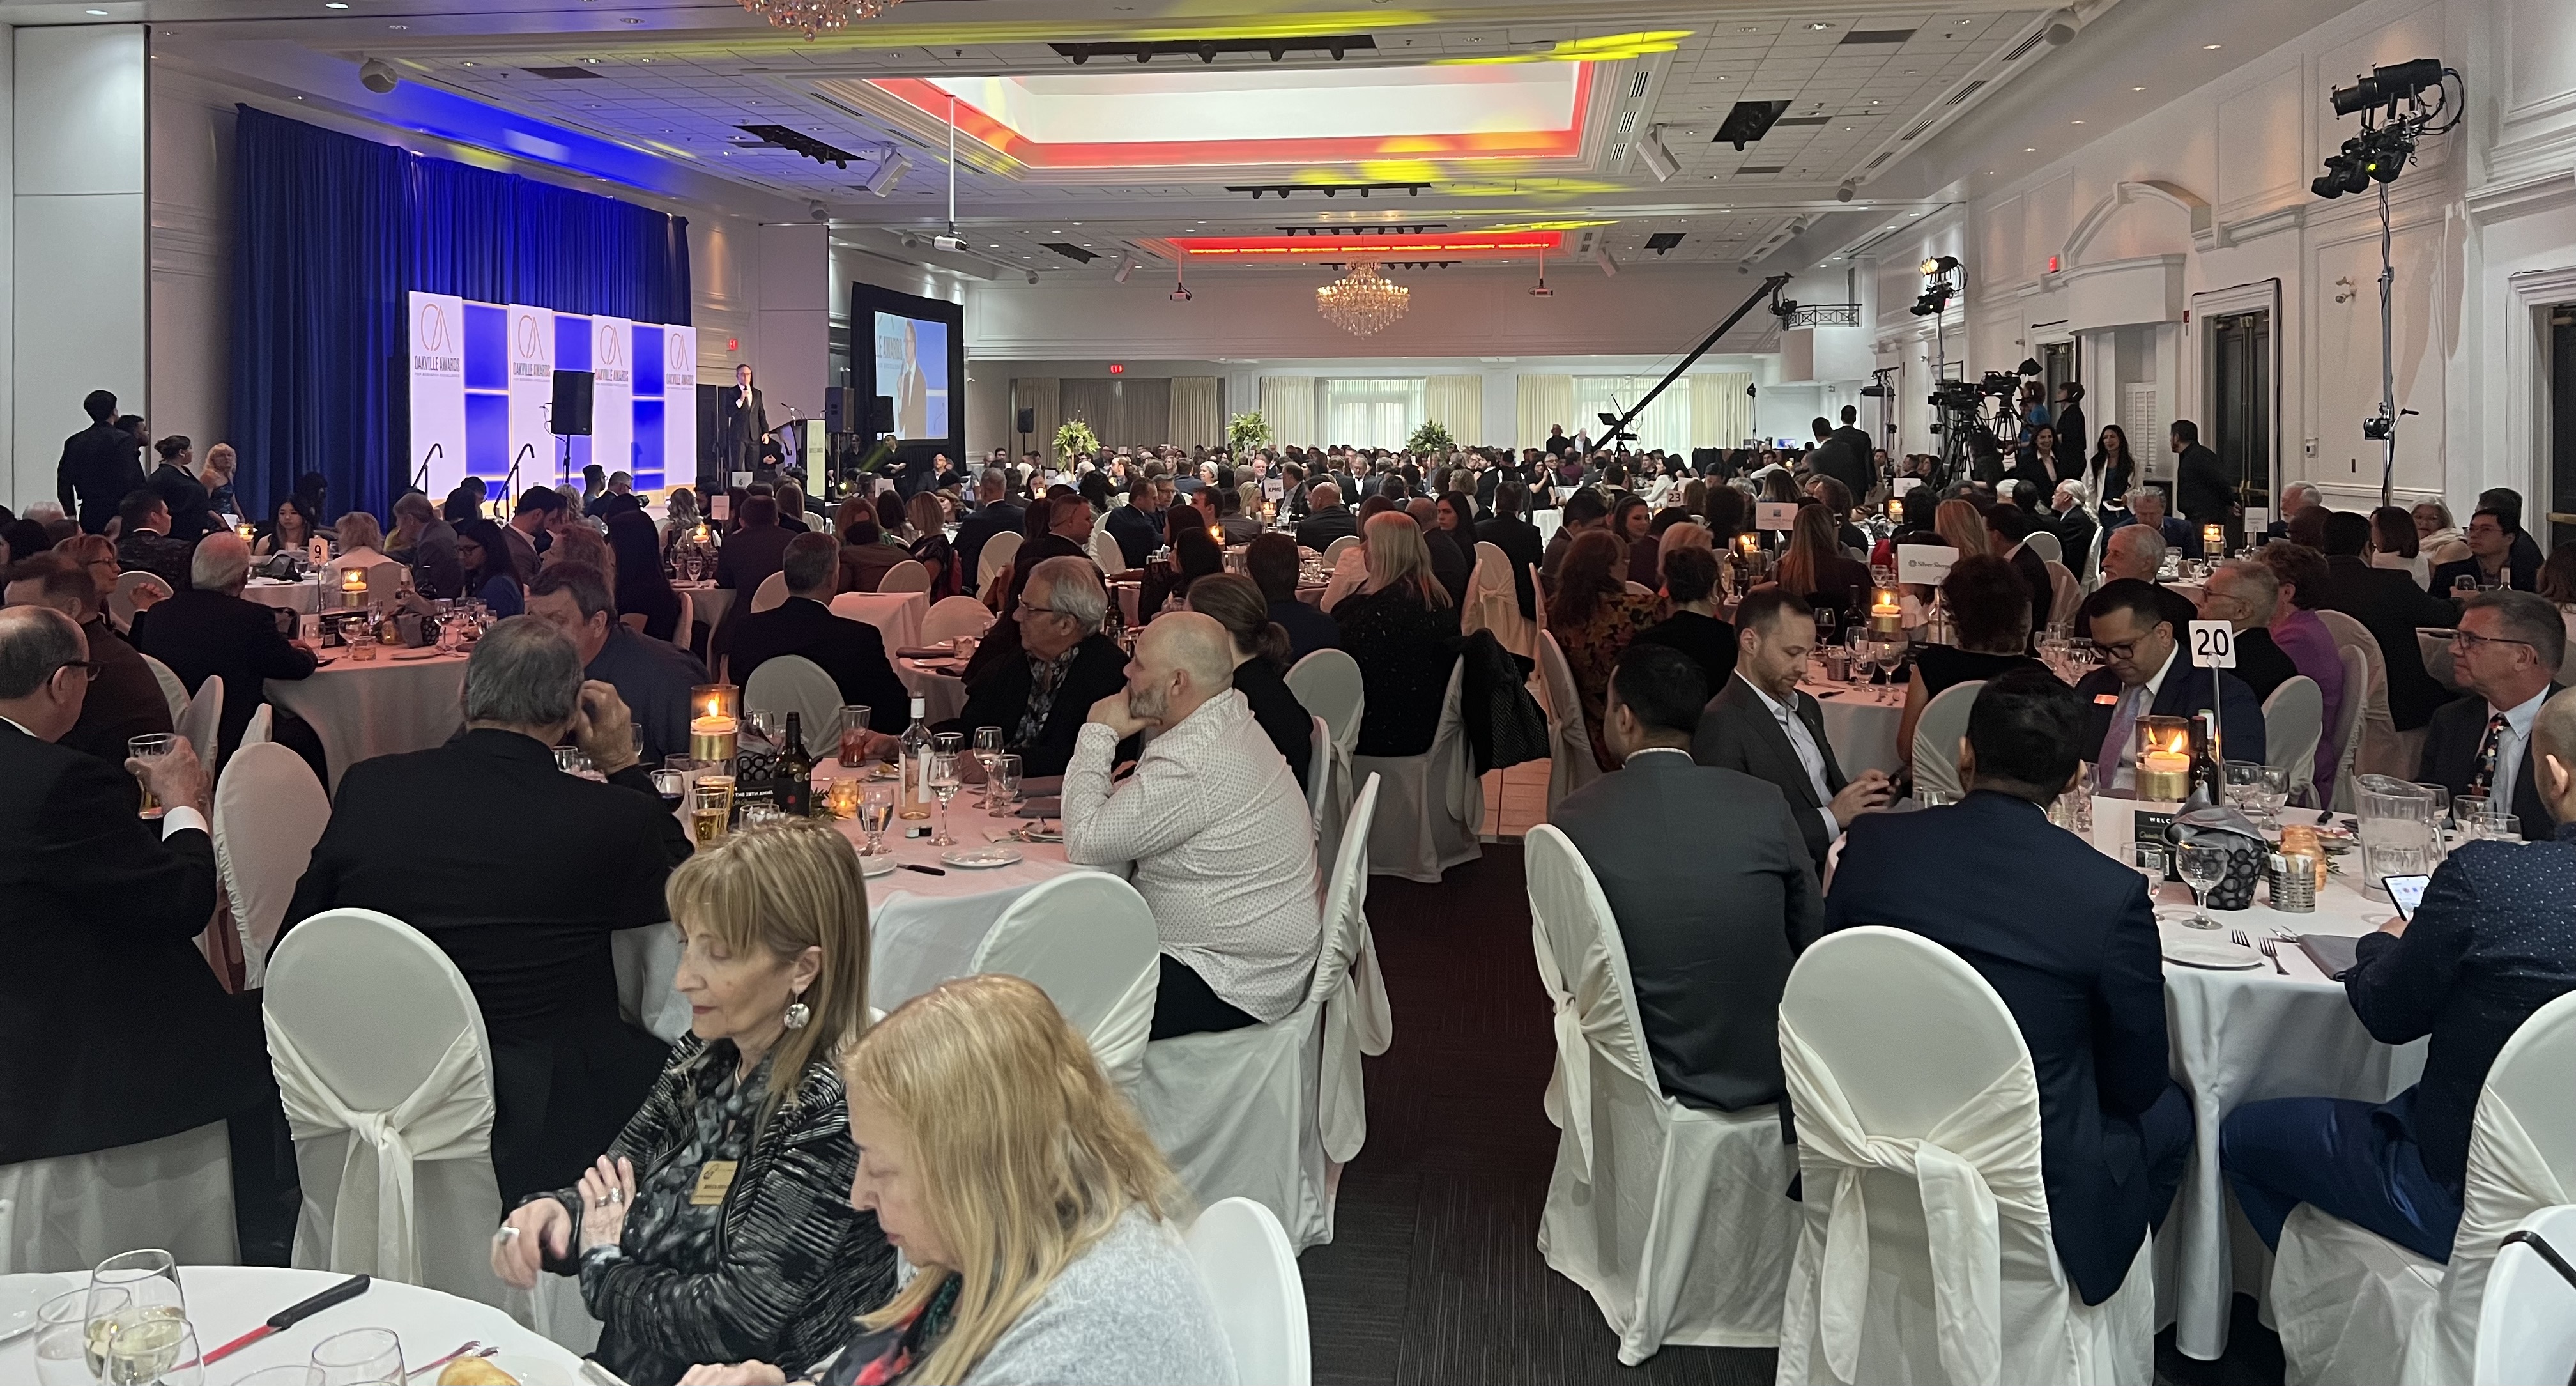 466 people packed the Oakville Awards for Business Excellence ceremony on April 26. | Oakville News N.M.